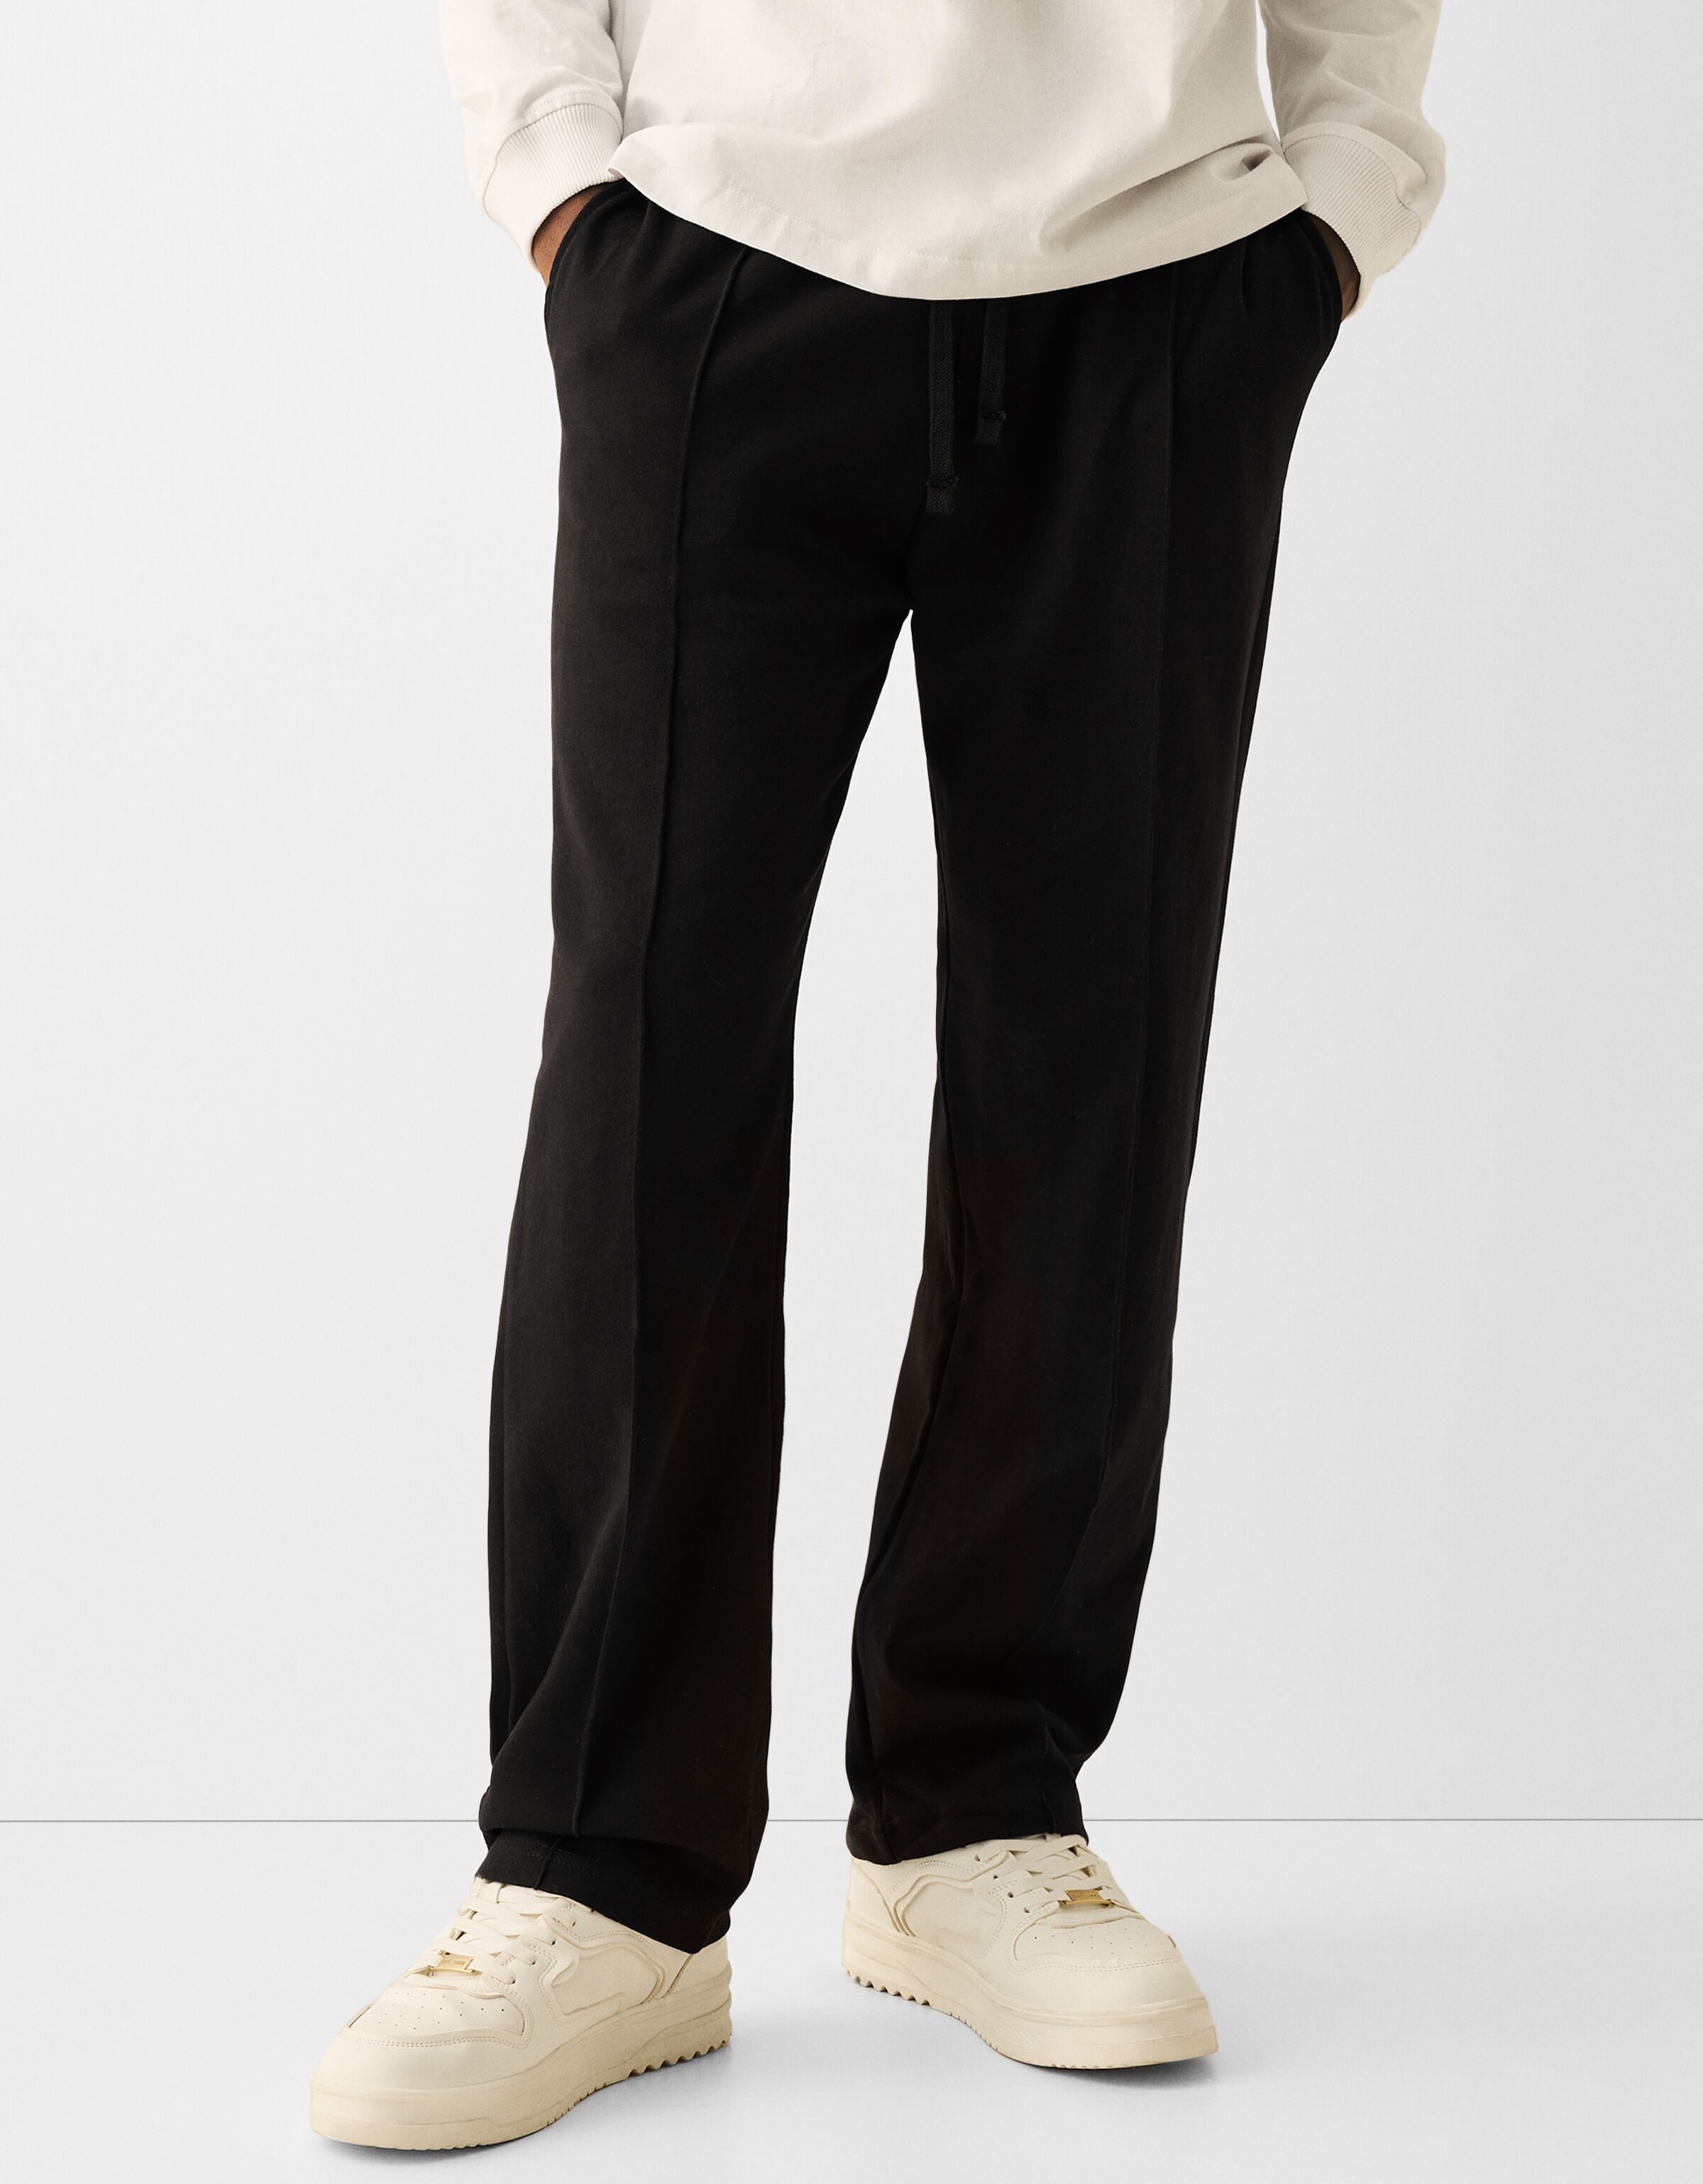 WIDE FIT PANTS LIMITED EDITION - Brick | ZARA United States